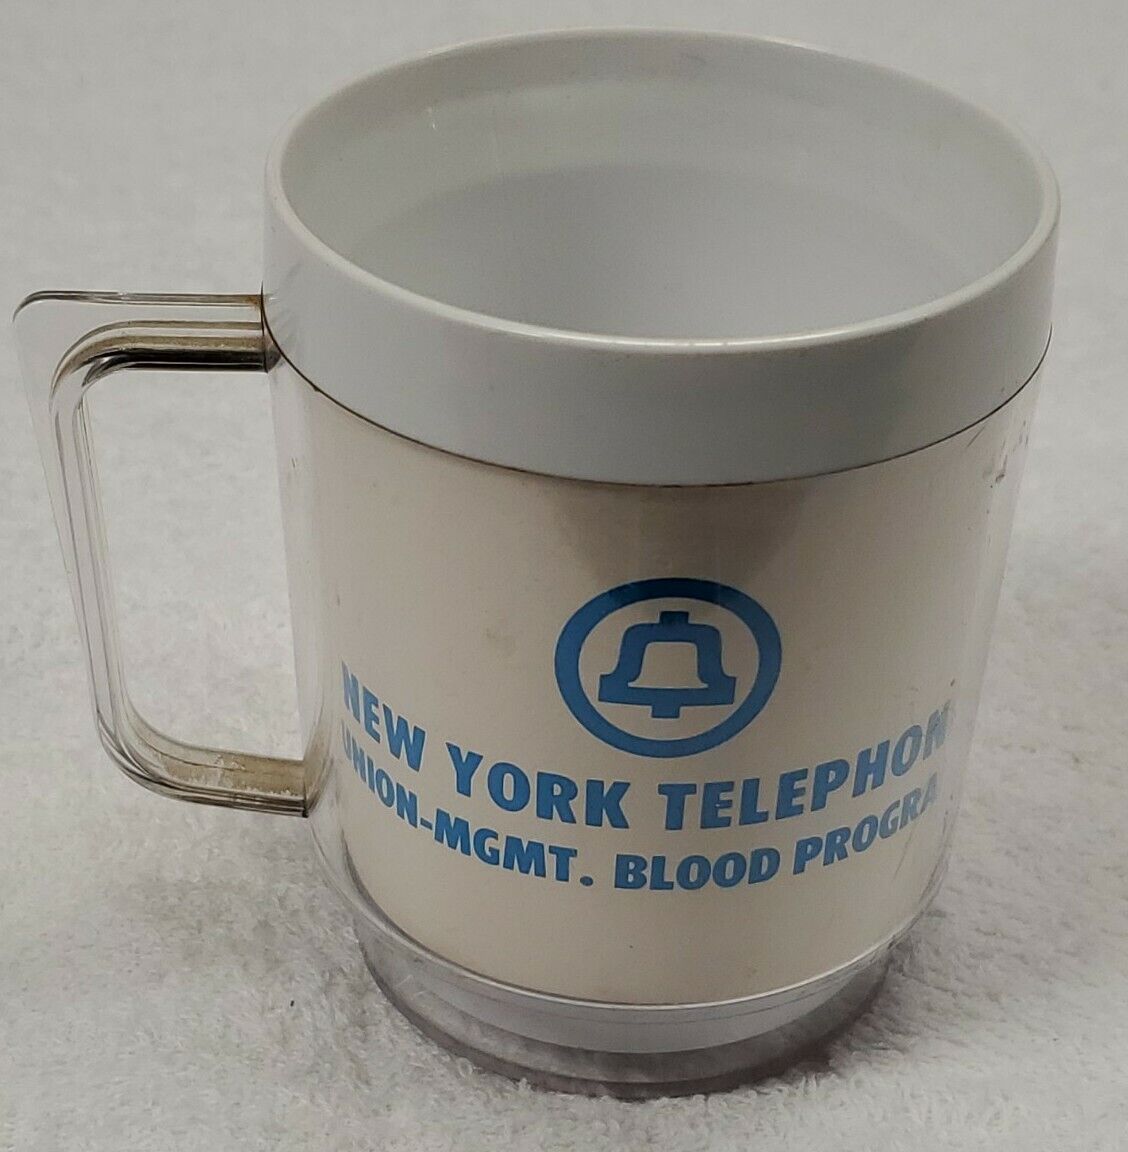 Vintage Bell Atlantic 1980's New York Telephone Union Mgmt. Blood Drive Mug Cup